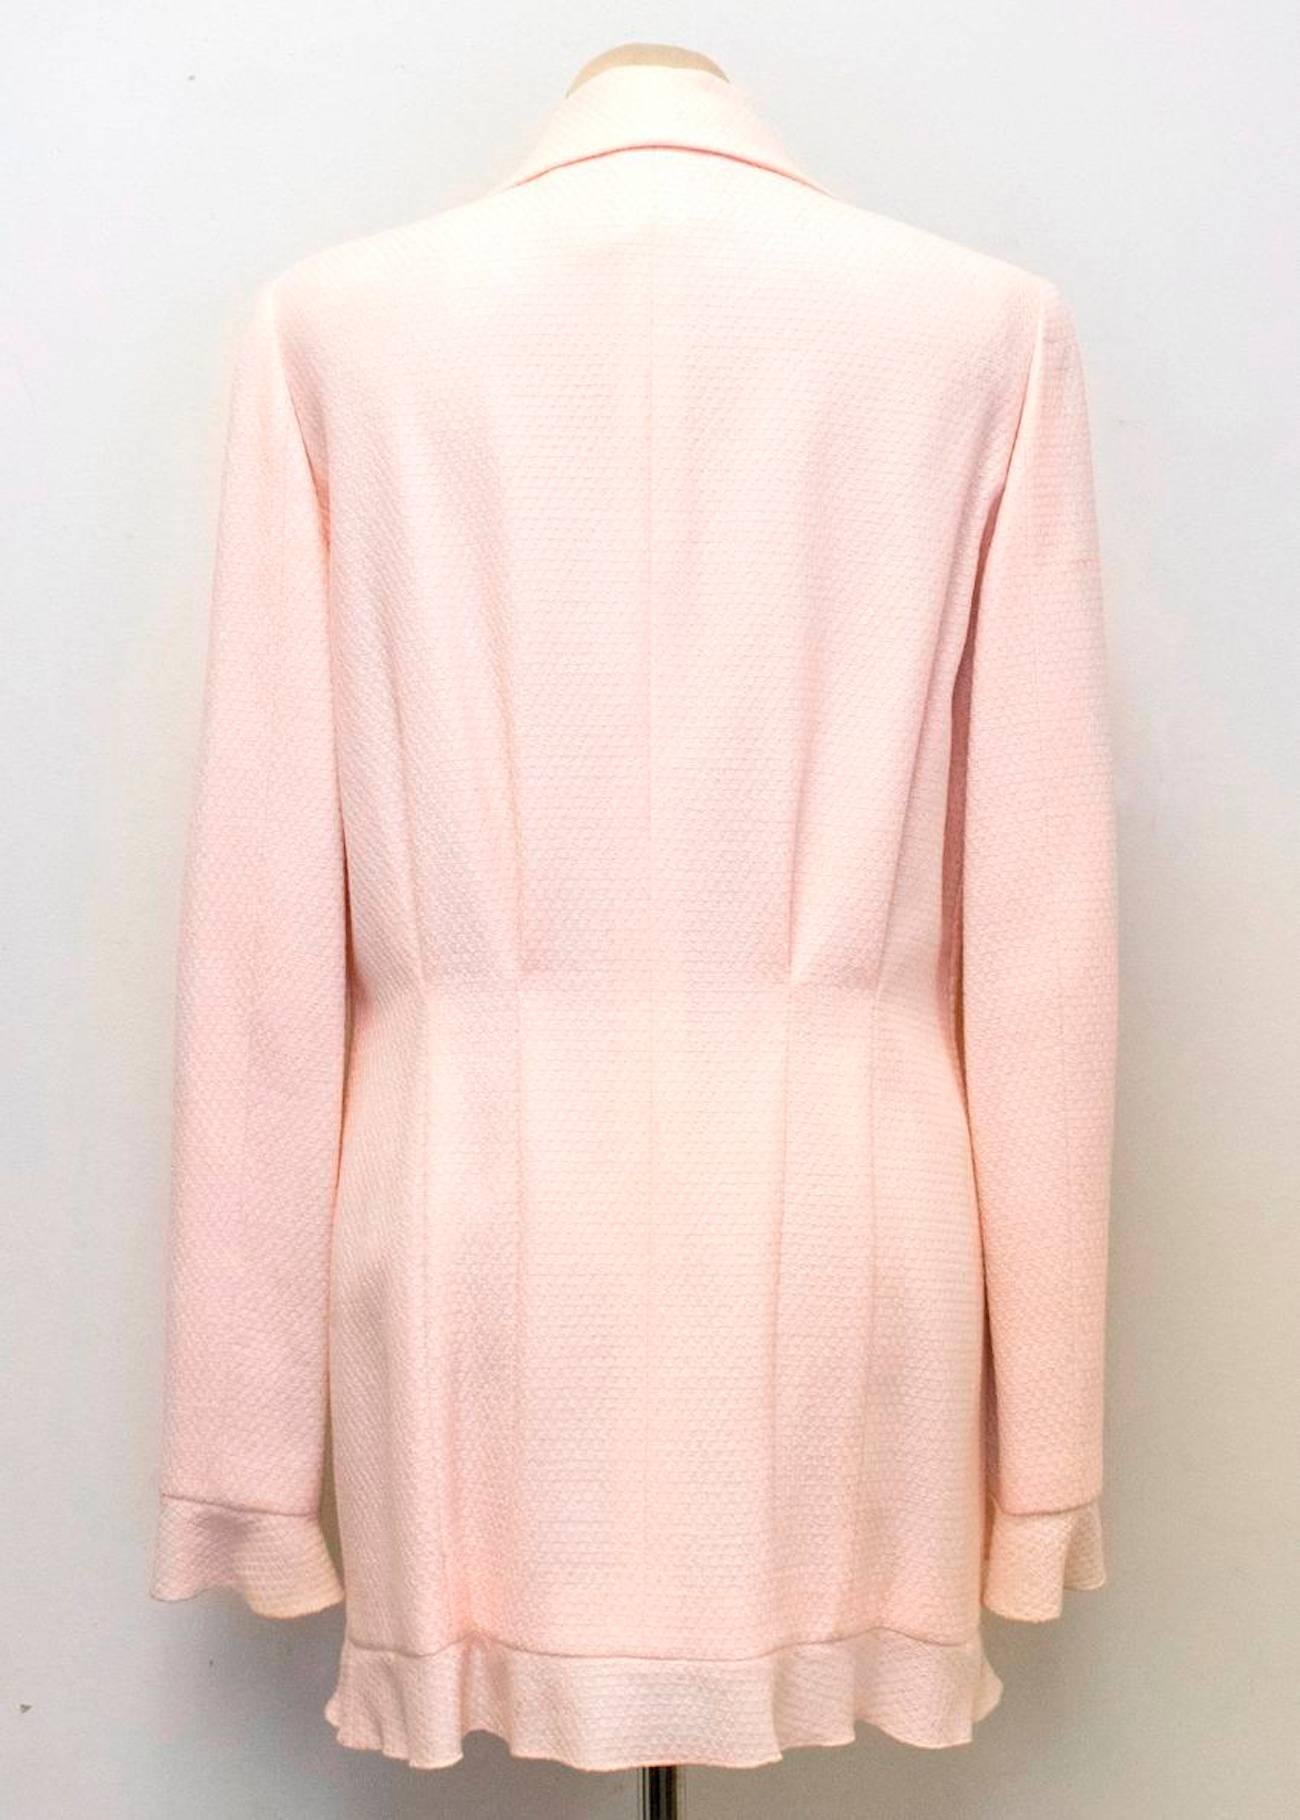 Chanel Nude Pink Jacket/Short Coat with Ruffled Cuffs and Hem  For Sale 4